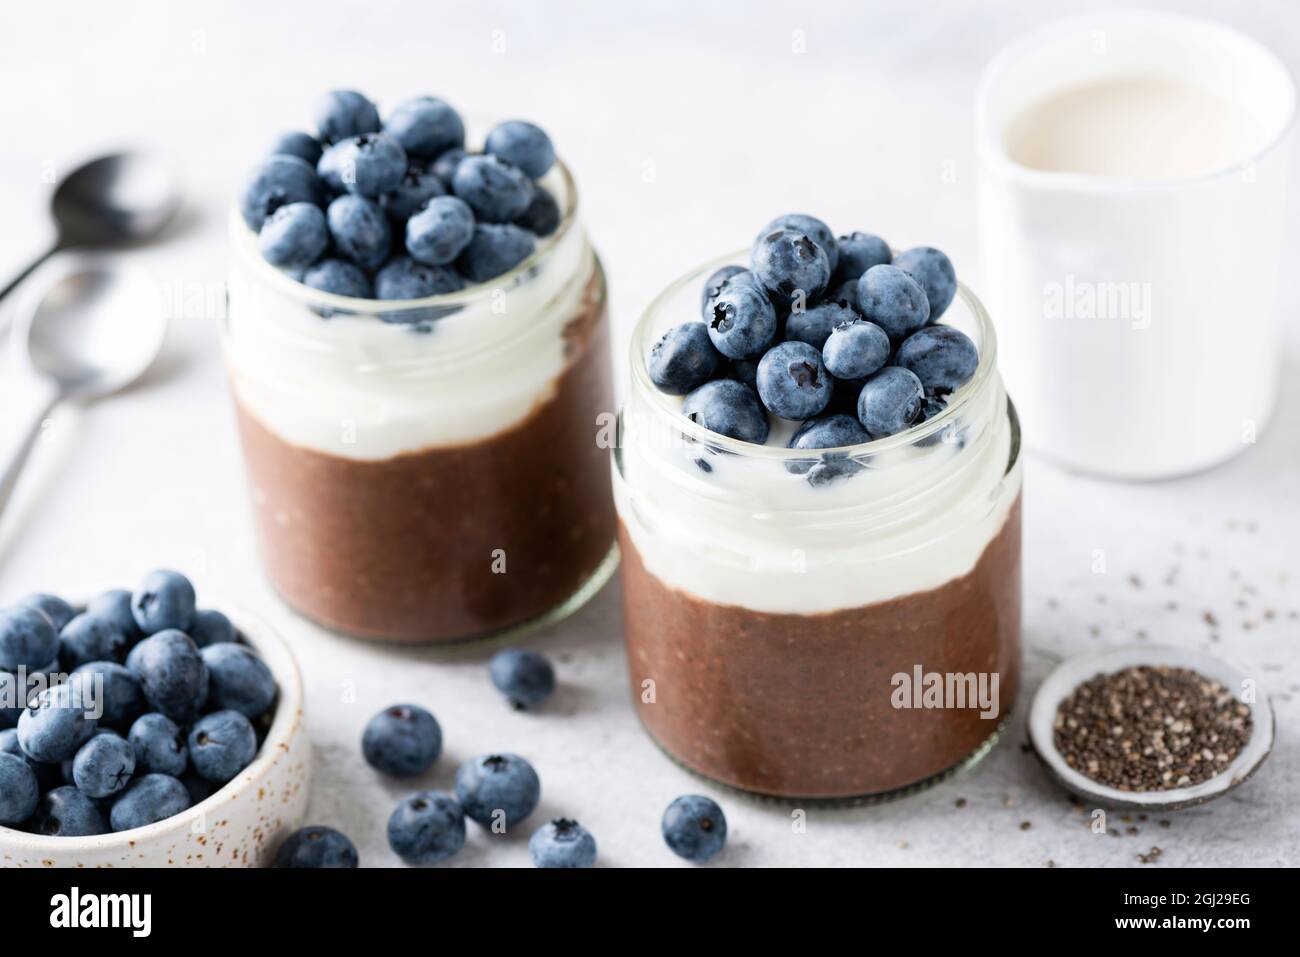 Chocolate chia pudding with yogurt layer and blueberries in a jar, closeup view. Healthy dessert or sweet snack Stock Photo